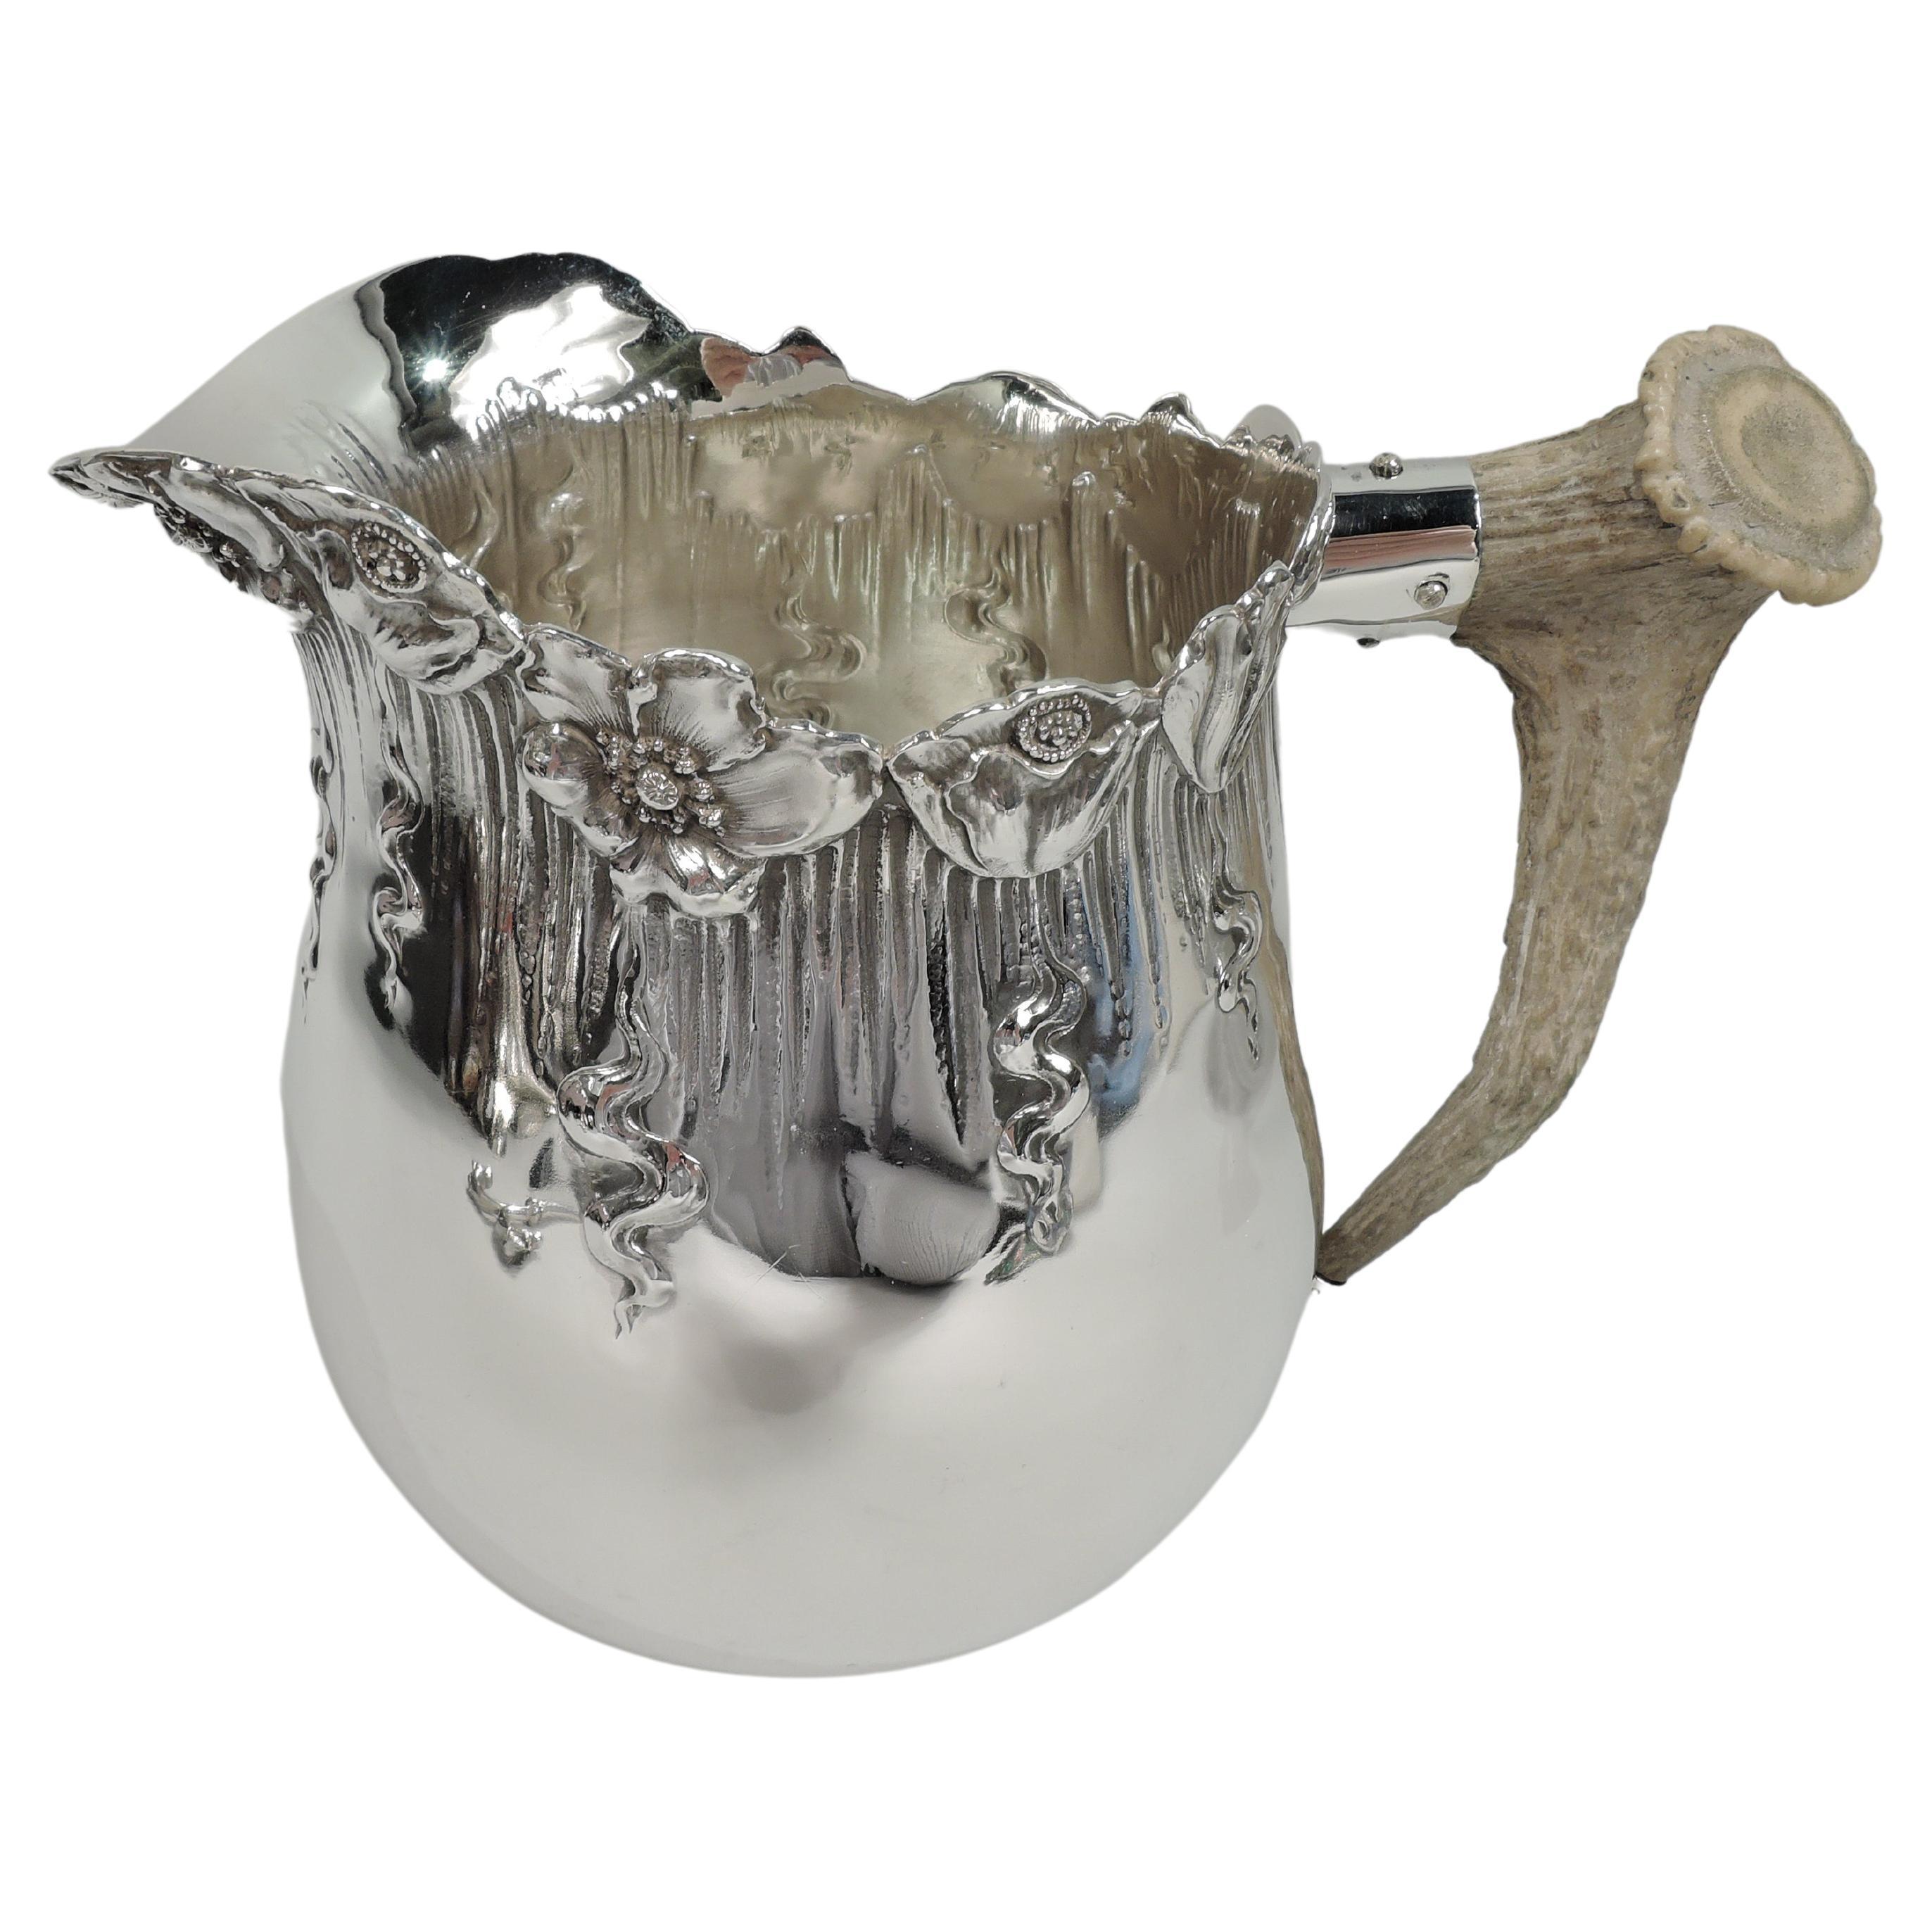 Shiebler Art Nouveau Sterling Silver Water Pitcher with Horn Handle